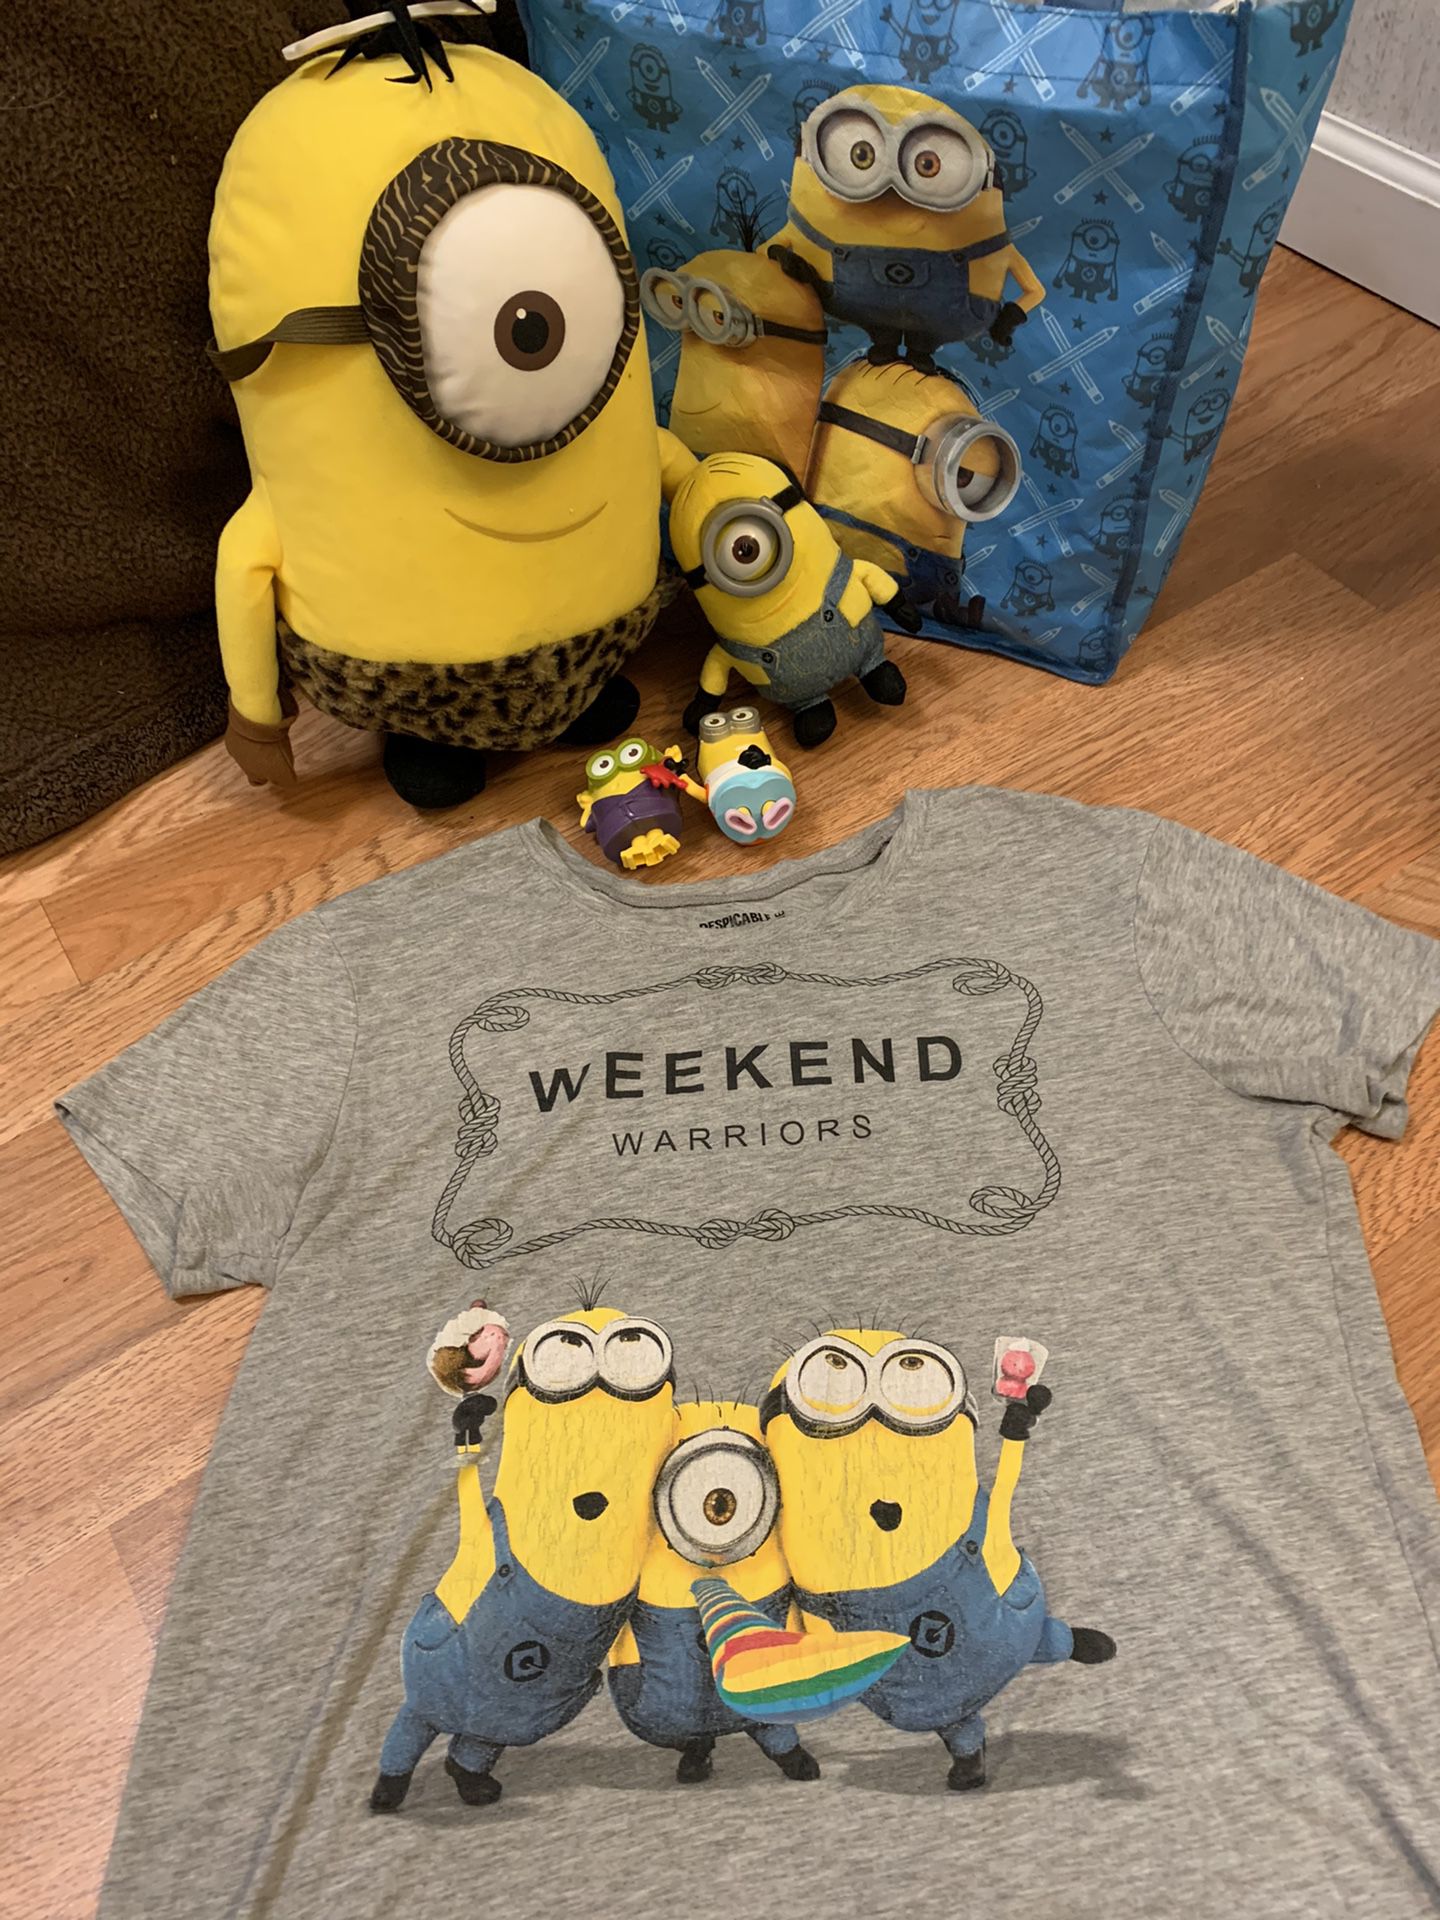 Minion themed clothes+tote bag + toys